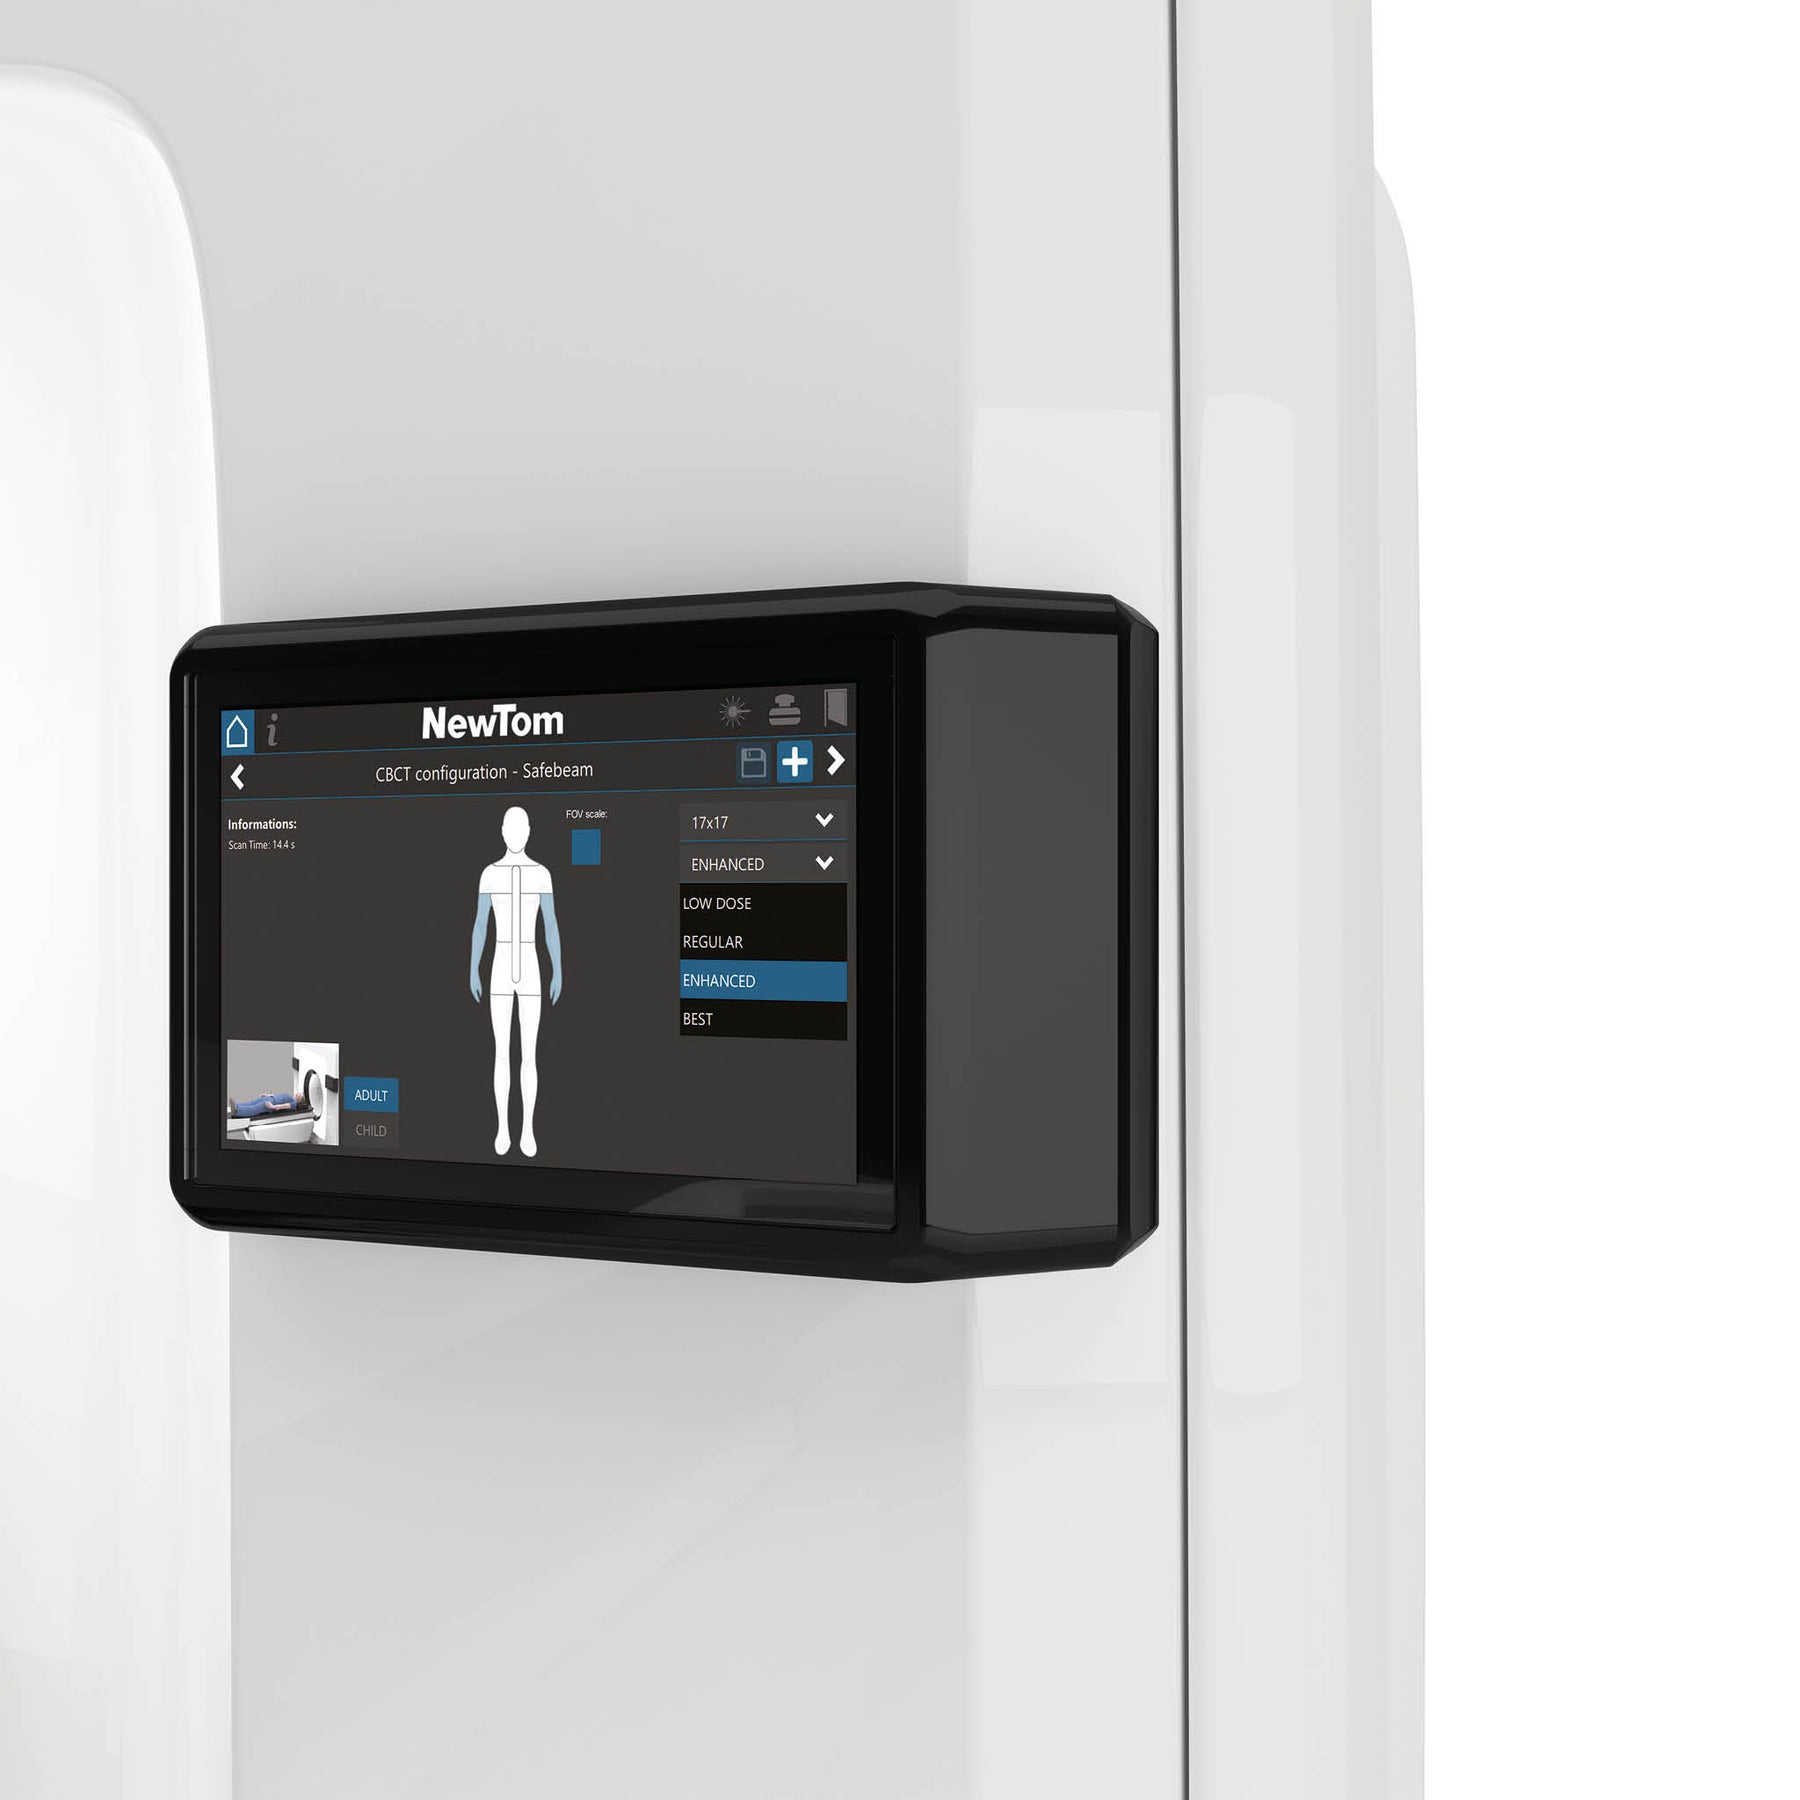 NewTom 7G is the most advanced CBCT device on the market. Innovative 3D and 2D analysis functions